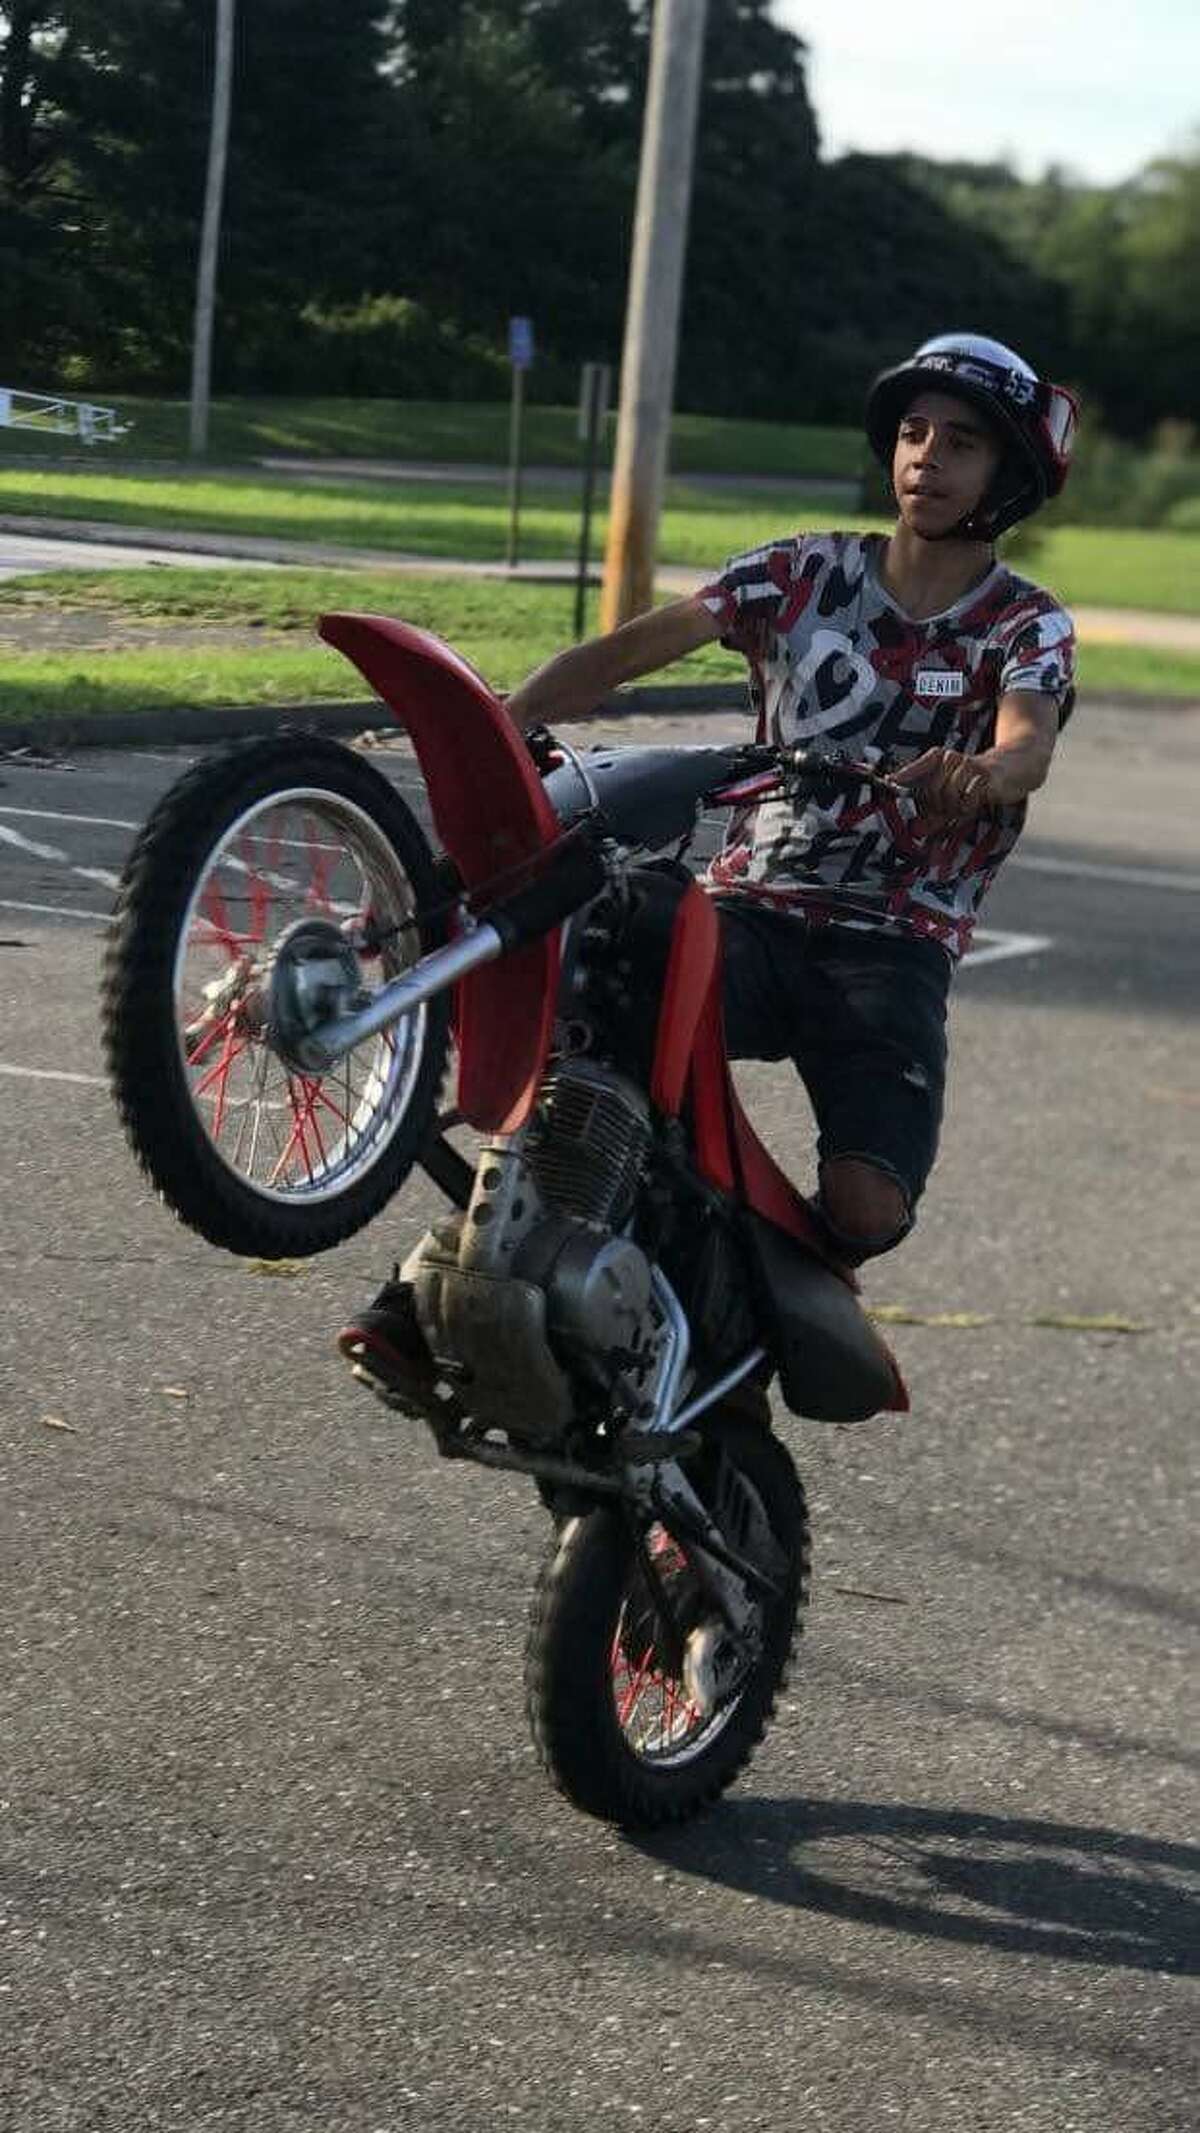 In this undated photo, Adolfo “AJ” DeJesus rides a scooter. DeJesus, 17, and an 18-year-old were hospitalized after a pickup truck struck the scooter they were riding on Kossuth Street on June 15. DeJesus was seriously injured and died days later, his family said.